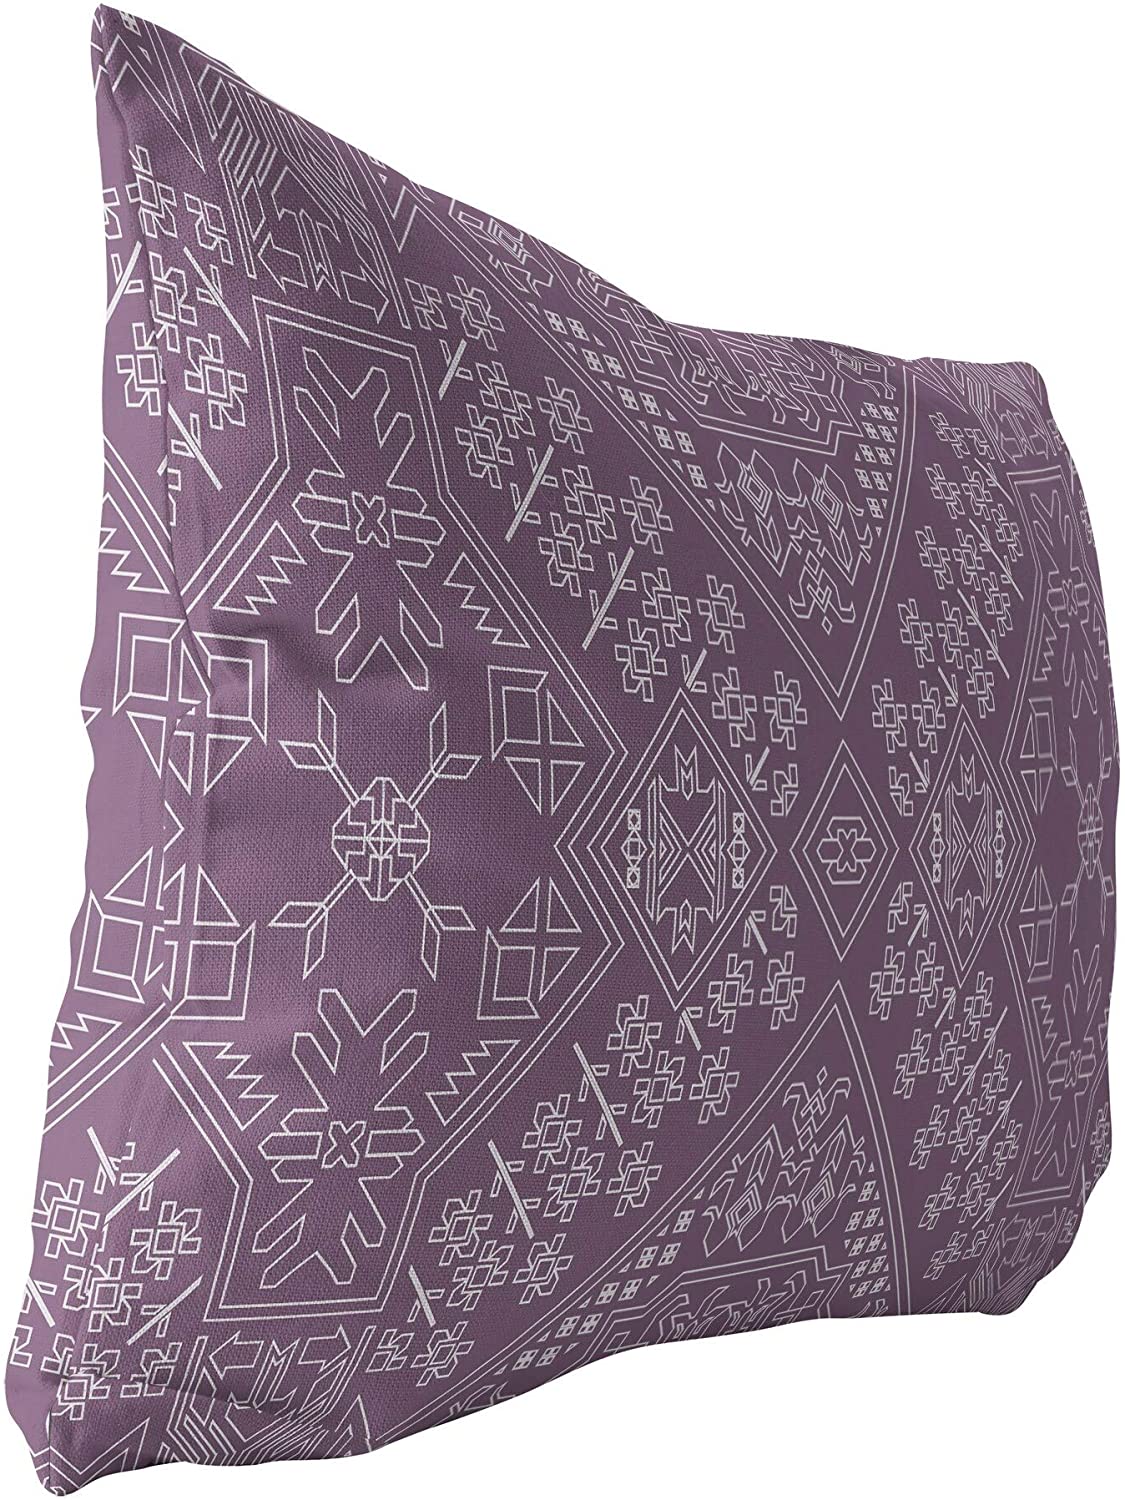 MISC Purple Indoor|Outdoor Lumbar Pillow 20x14 Purple Geometric Southwestern Polyester Removable Cover